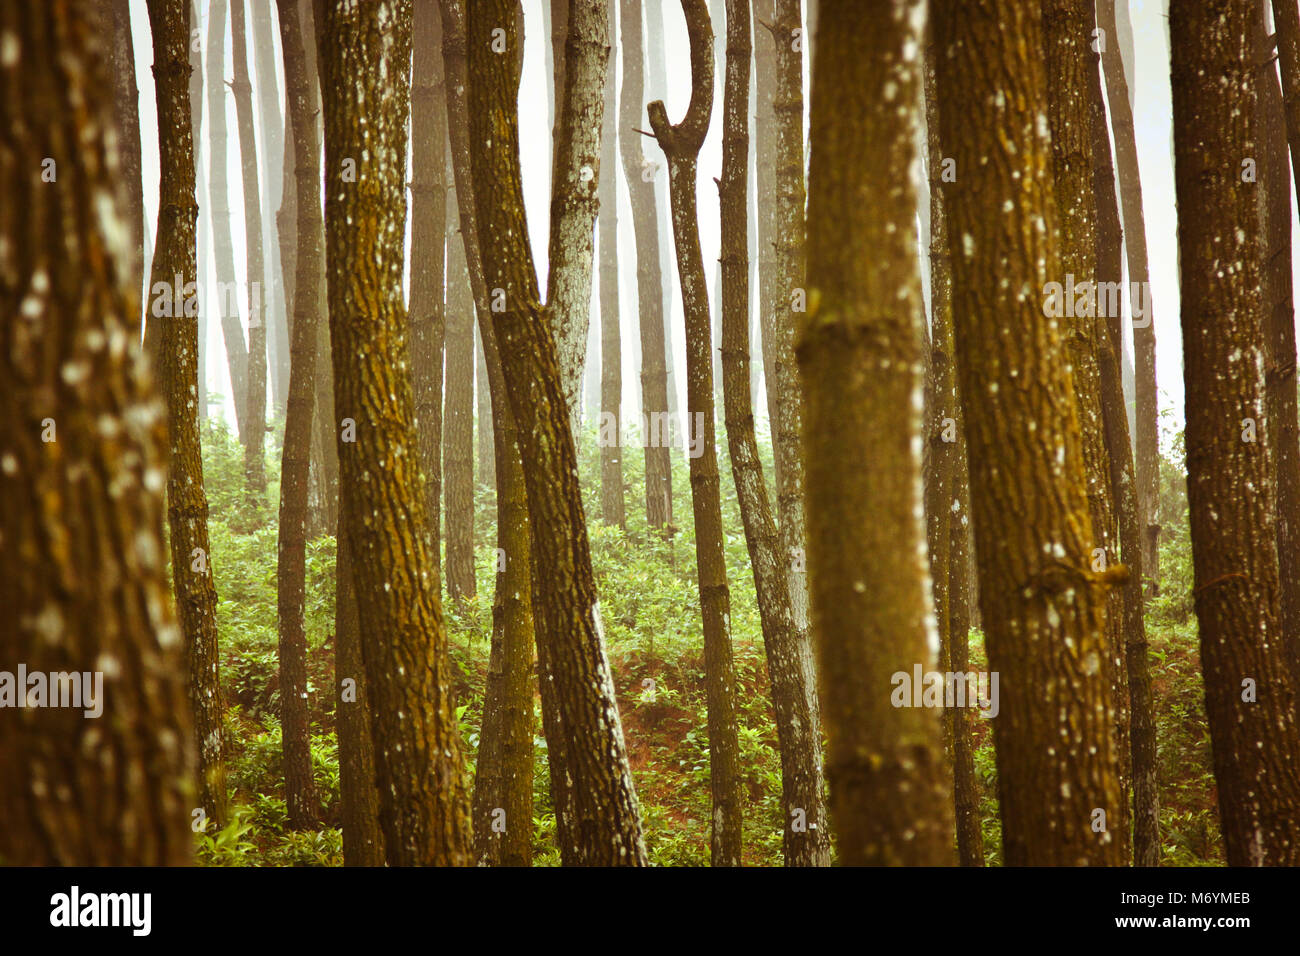 Misty pine forest with strong vertical pattern Stock Photo